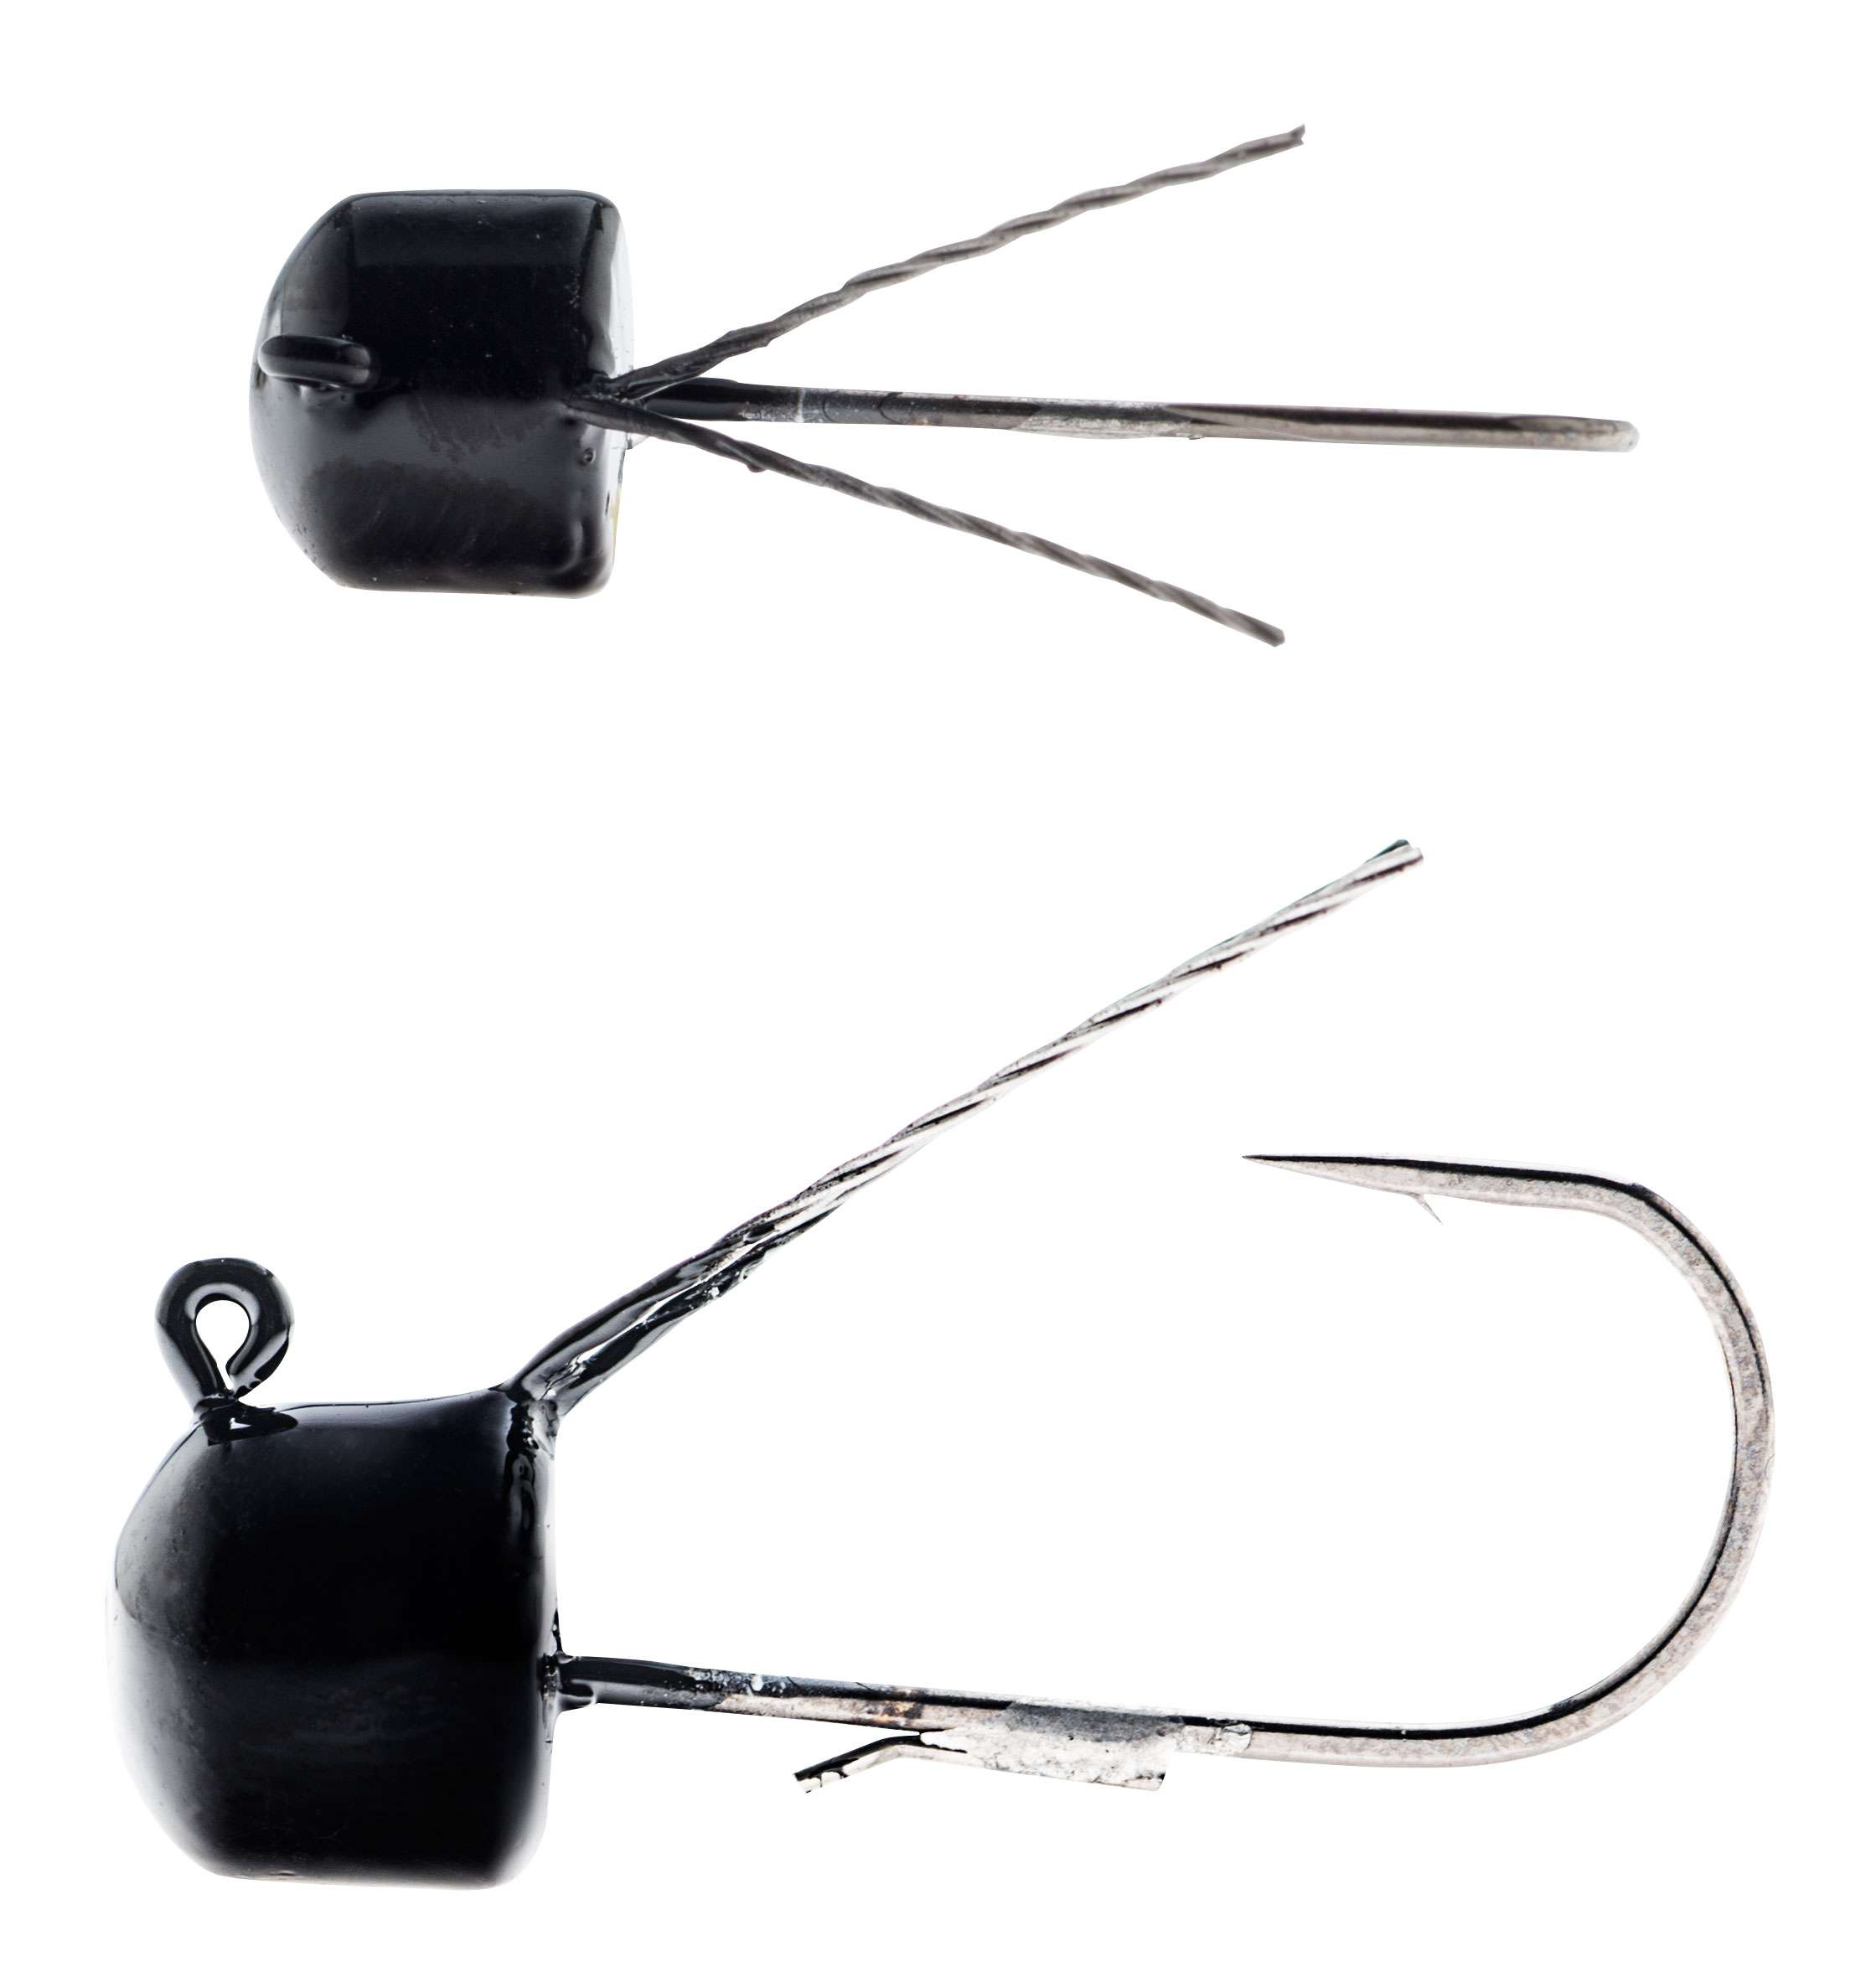 <b>Z-Man</b><br>	Finesse ShroomZ Weedless<br>			This new jighead features an adjustable dual weedguard and a welded wirekeeper to hold your plastics in place. A black nickel hook completes the package. Available in green pumpkin or black, and in sizes 1/10, 1/6 and 1/5 oz. 